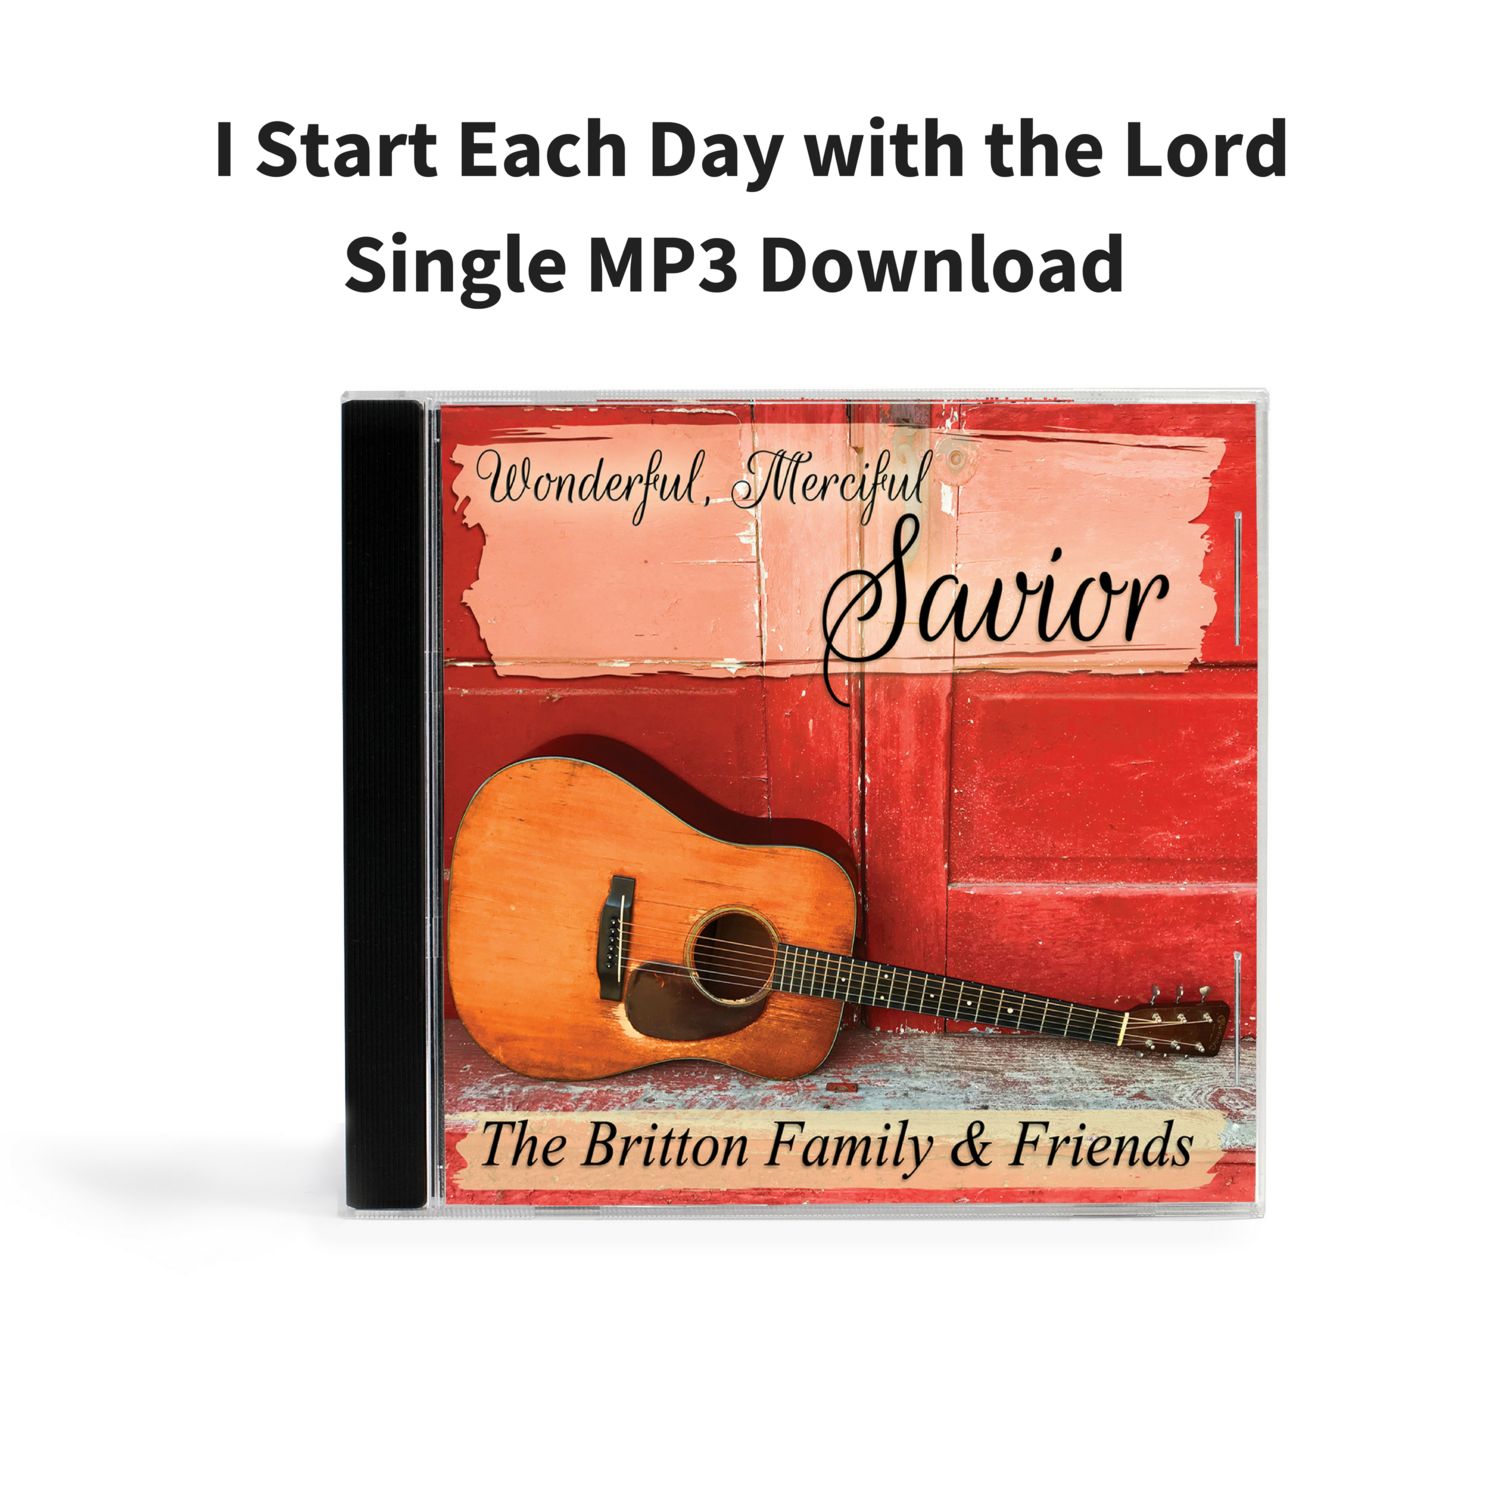 I Start Each Day with the Lord - Single MP3 Download